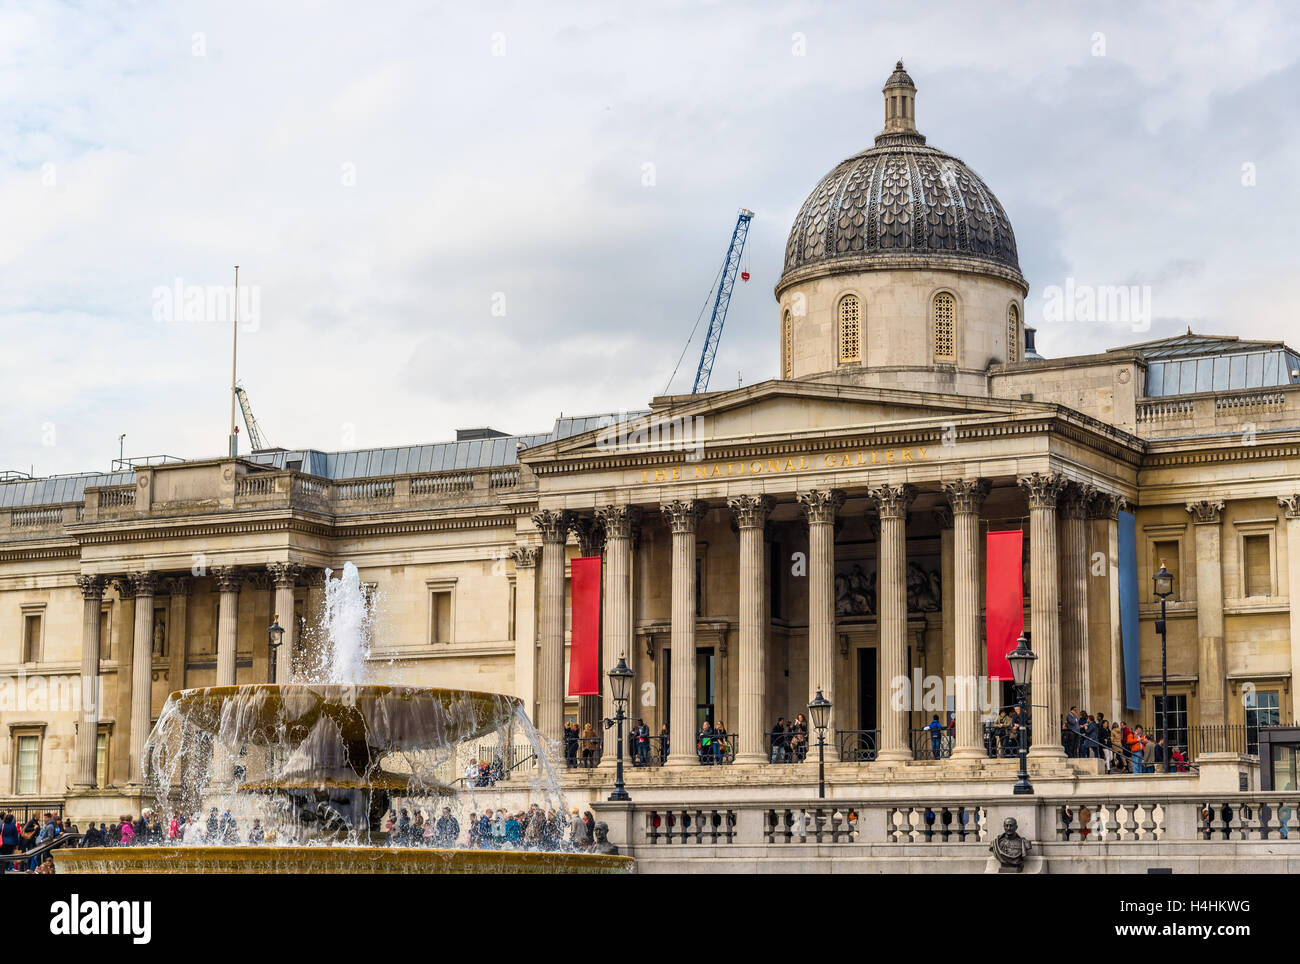 Fountain and the National Gallery on Trafalgar Square, London Stock Photo